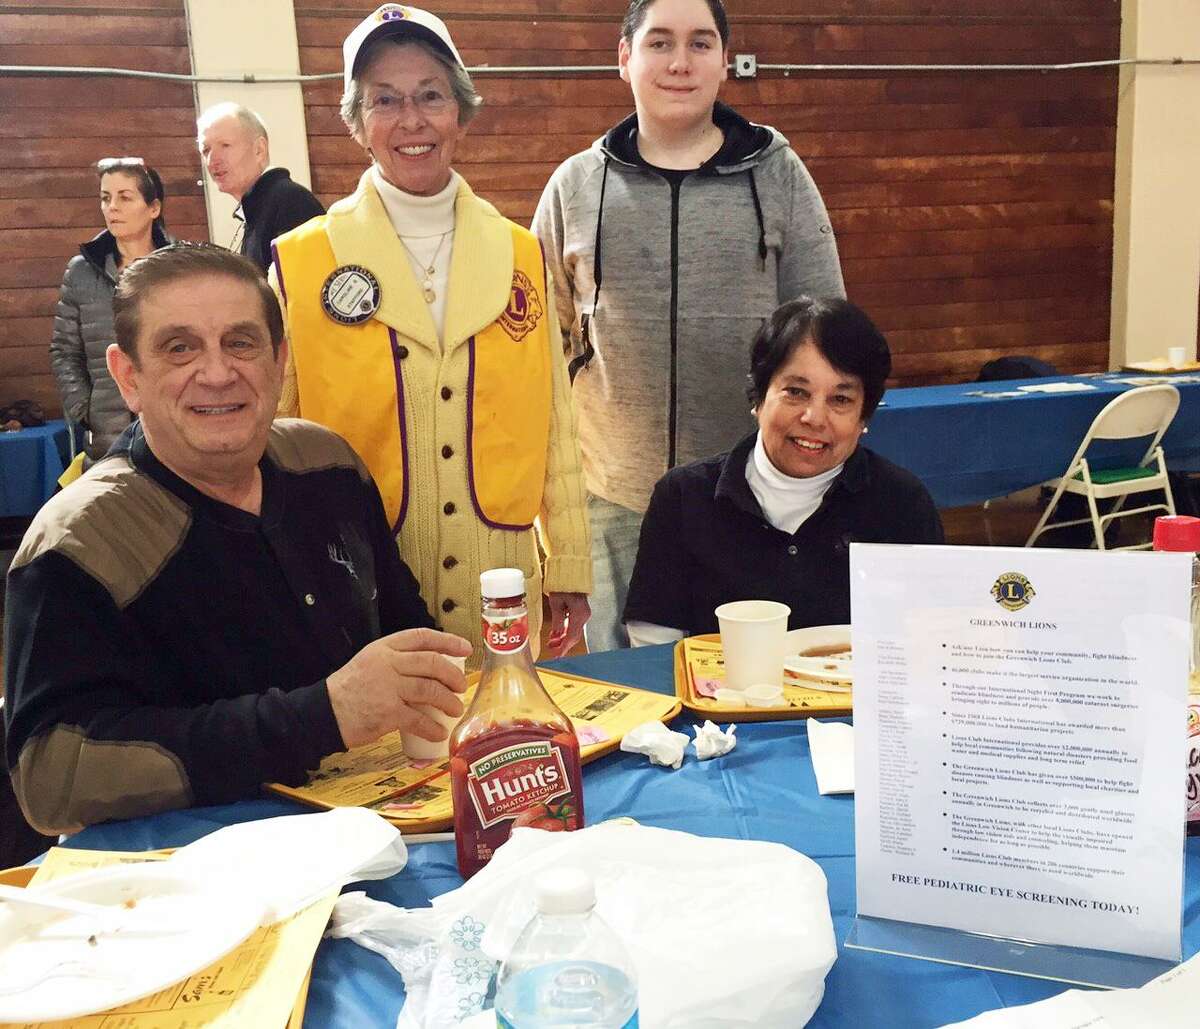 From left, Sam Romeo, Caroline Stafford, Daniel Thiverge and Mary Romeo enjoy the annual Lions Club Pancake Fry in Old Greenwich.